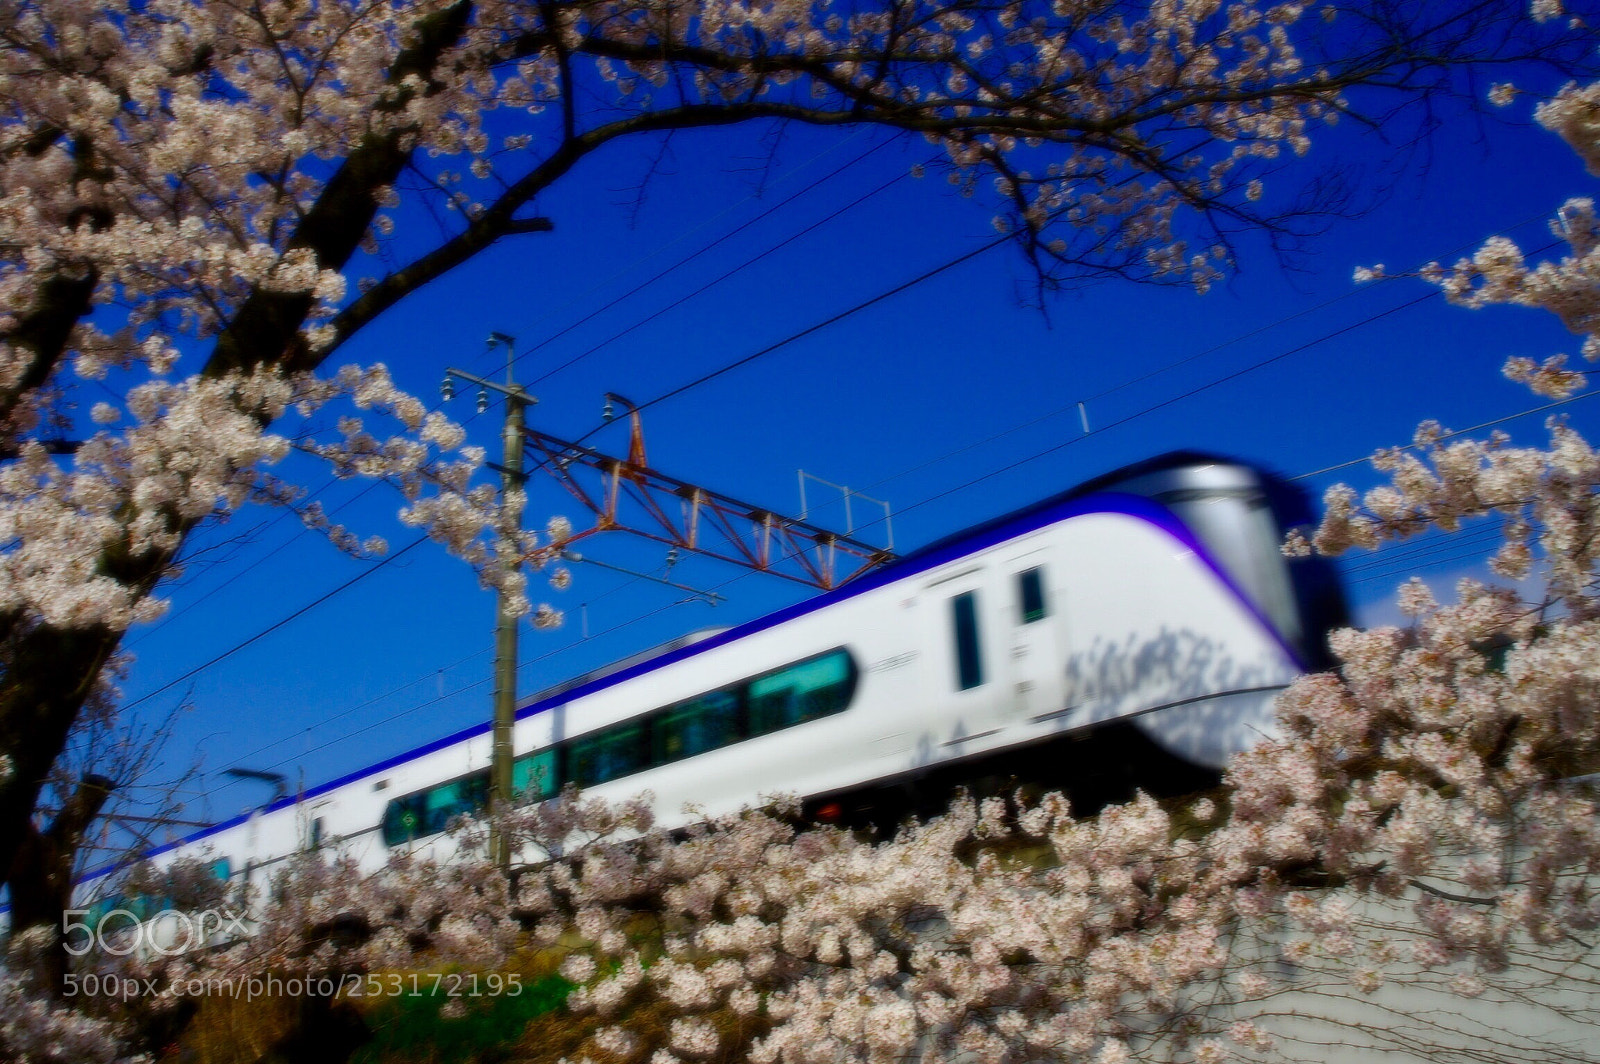 Pentax K-3 II sample photo. Limited express train caught photography